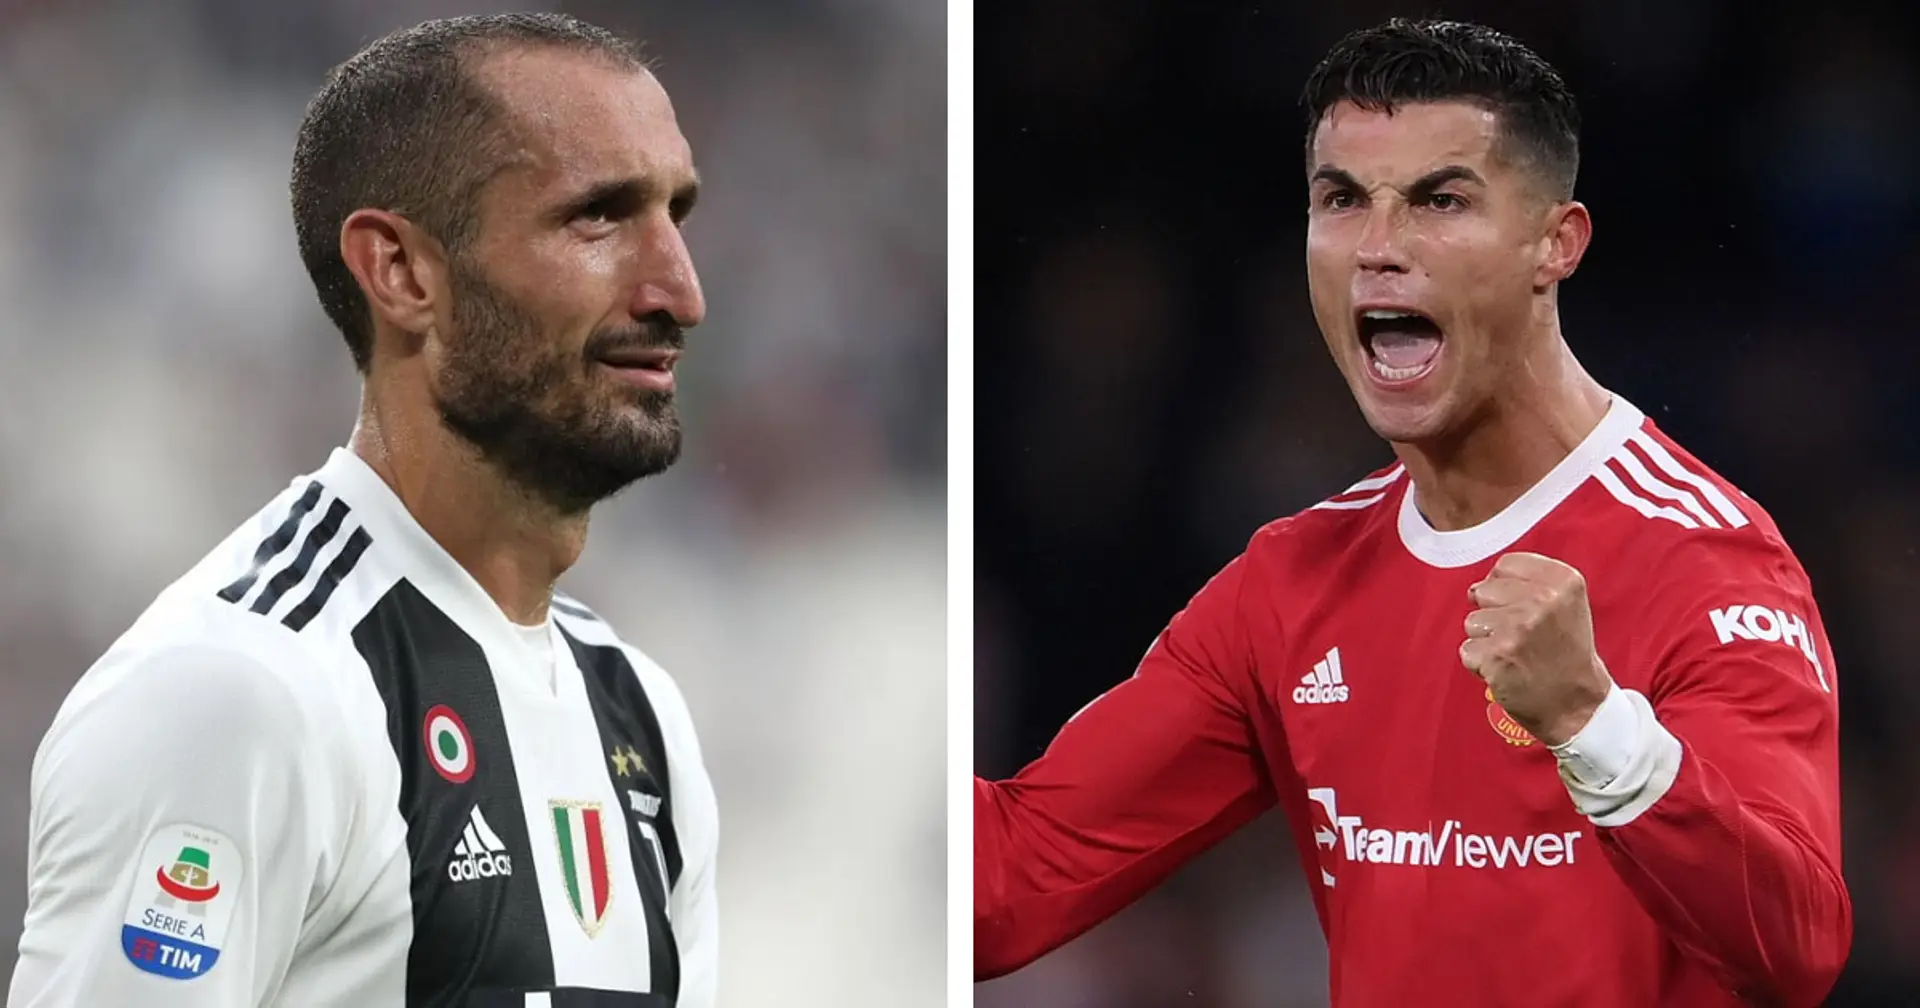 Giorgio Chiellini explains why it 'would've been better for Juventus' if Ronaldo had left earlier